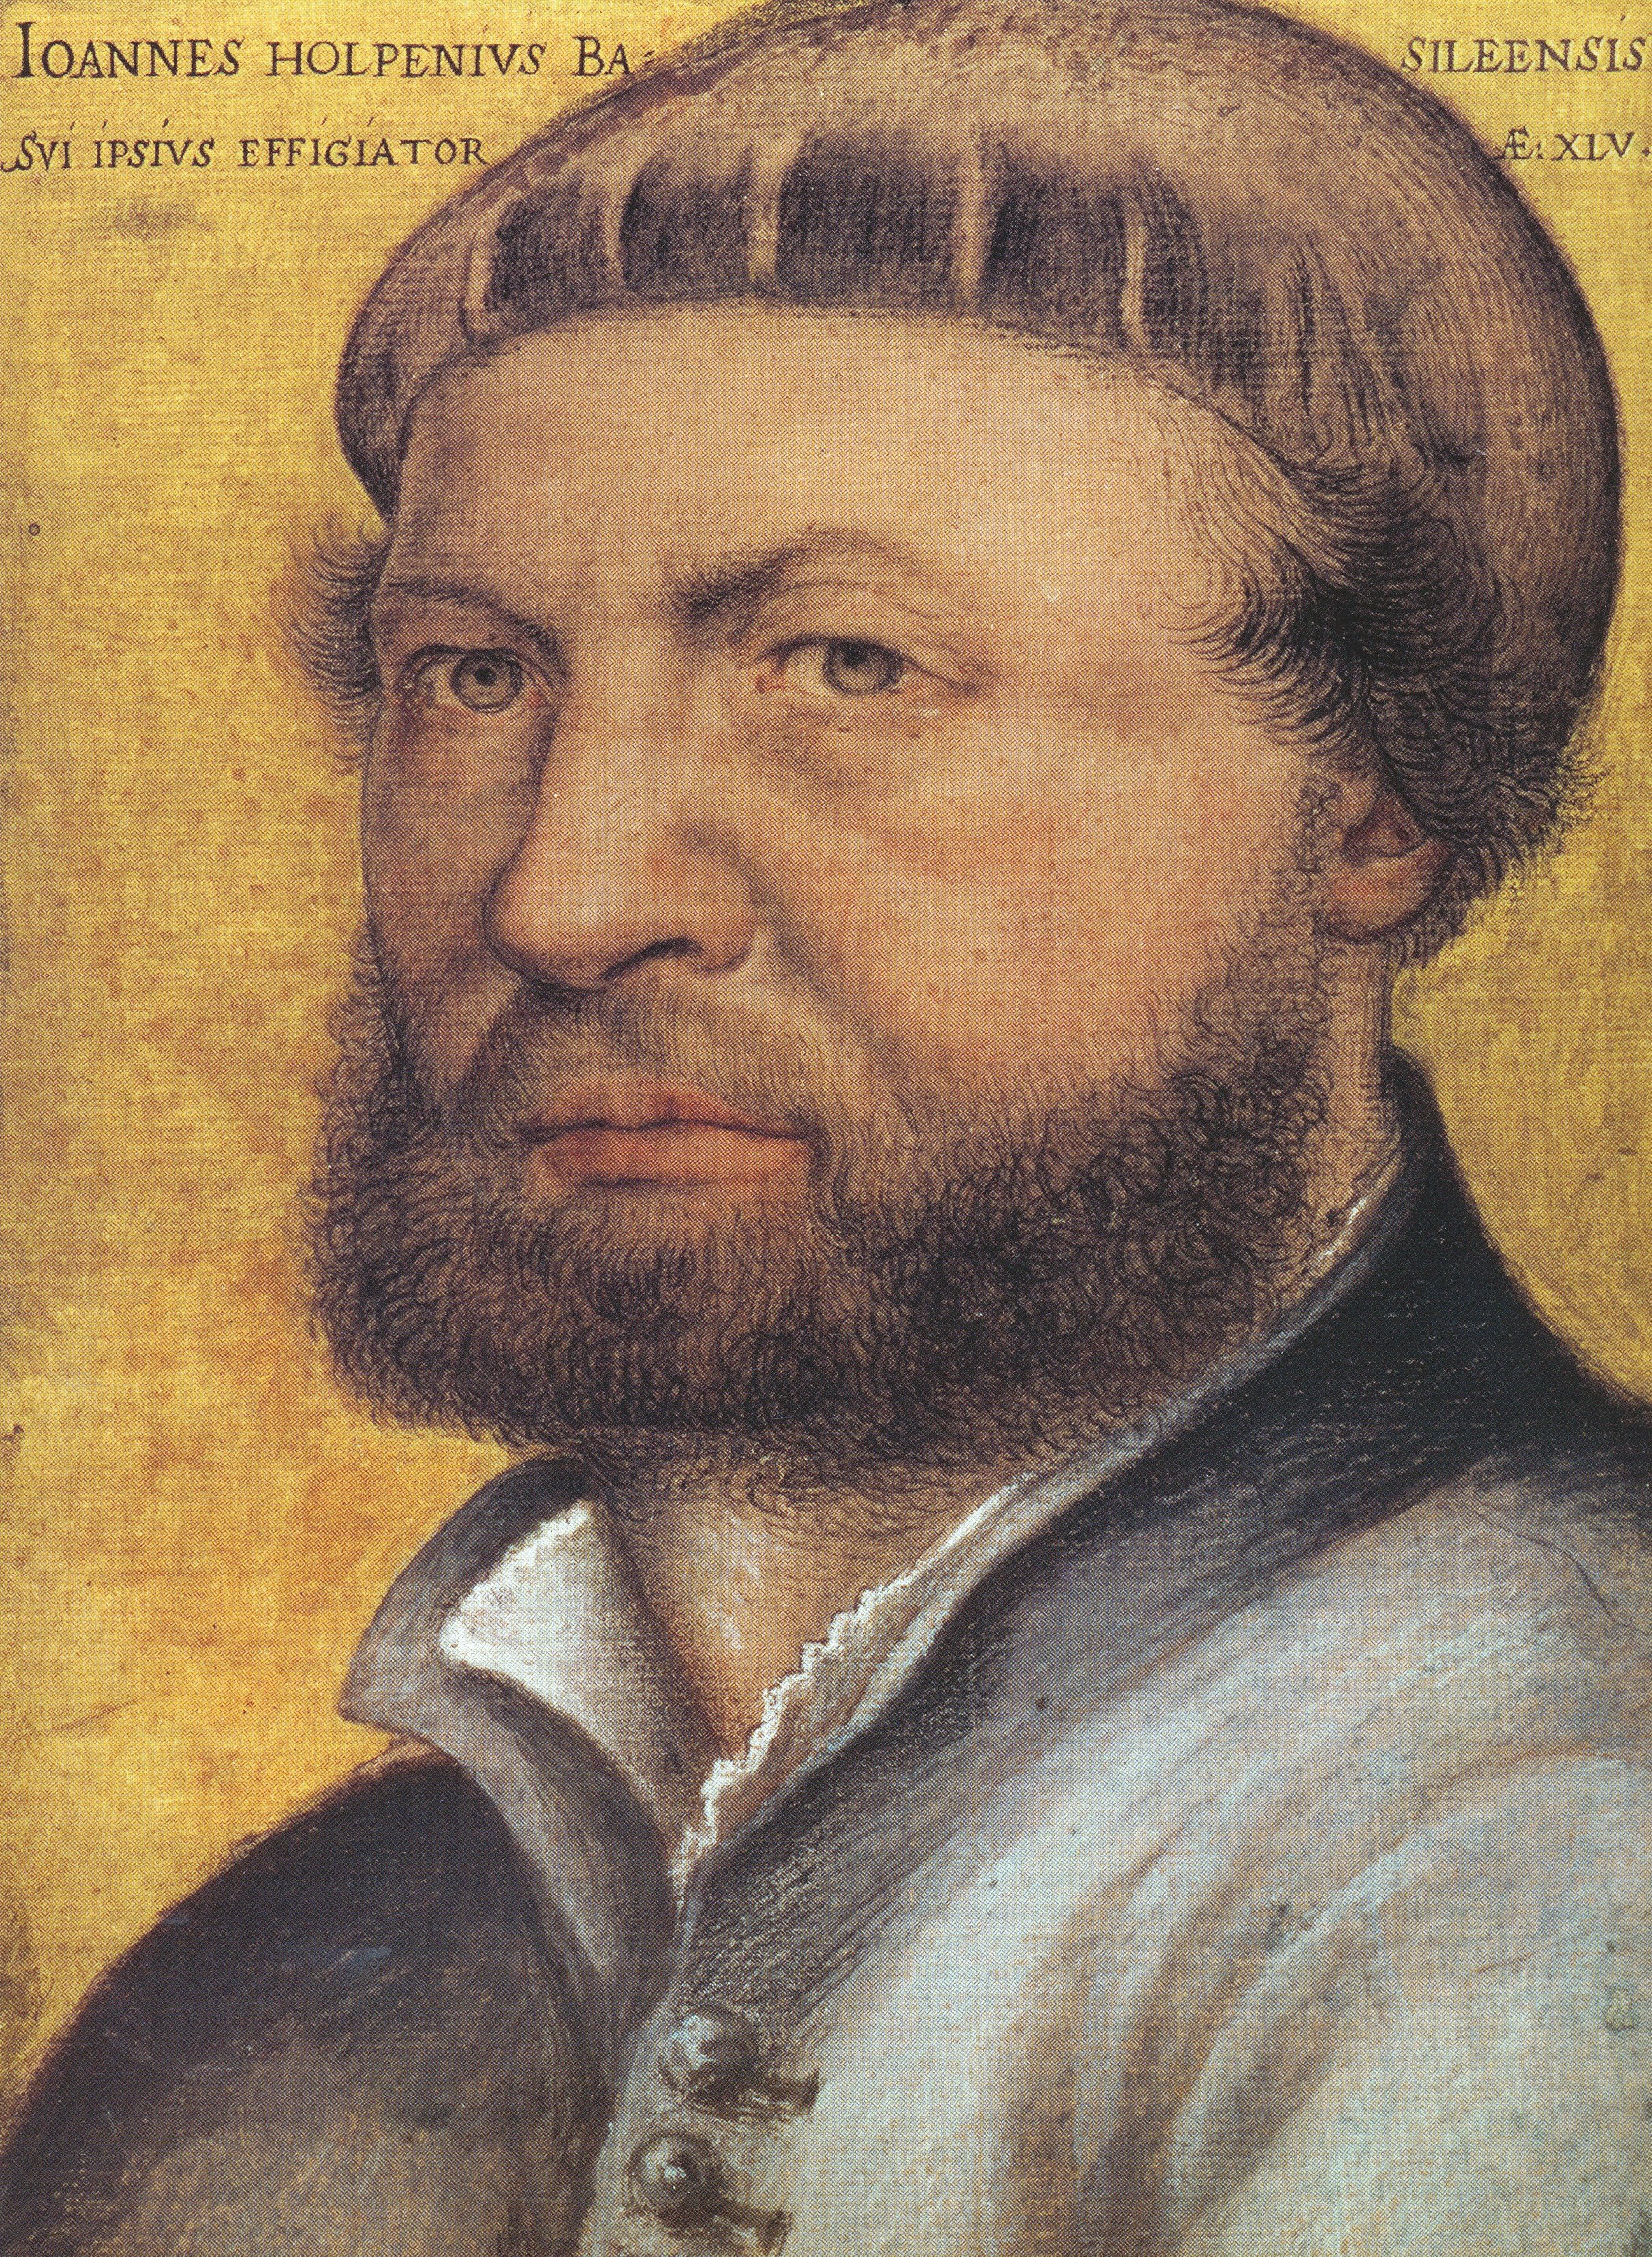 Hans Holbein the Younger - c. 1497 - 1543